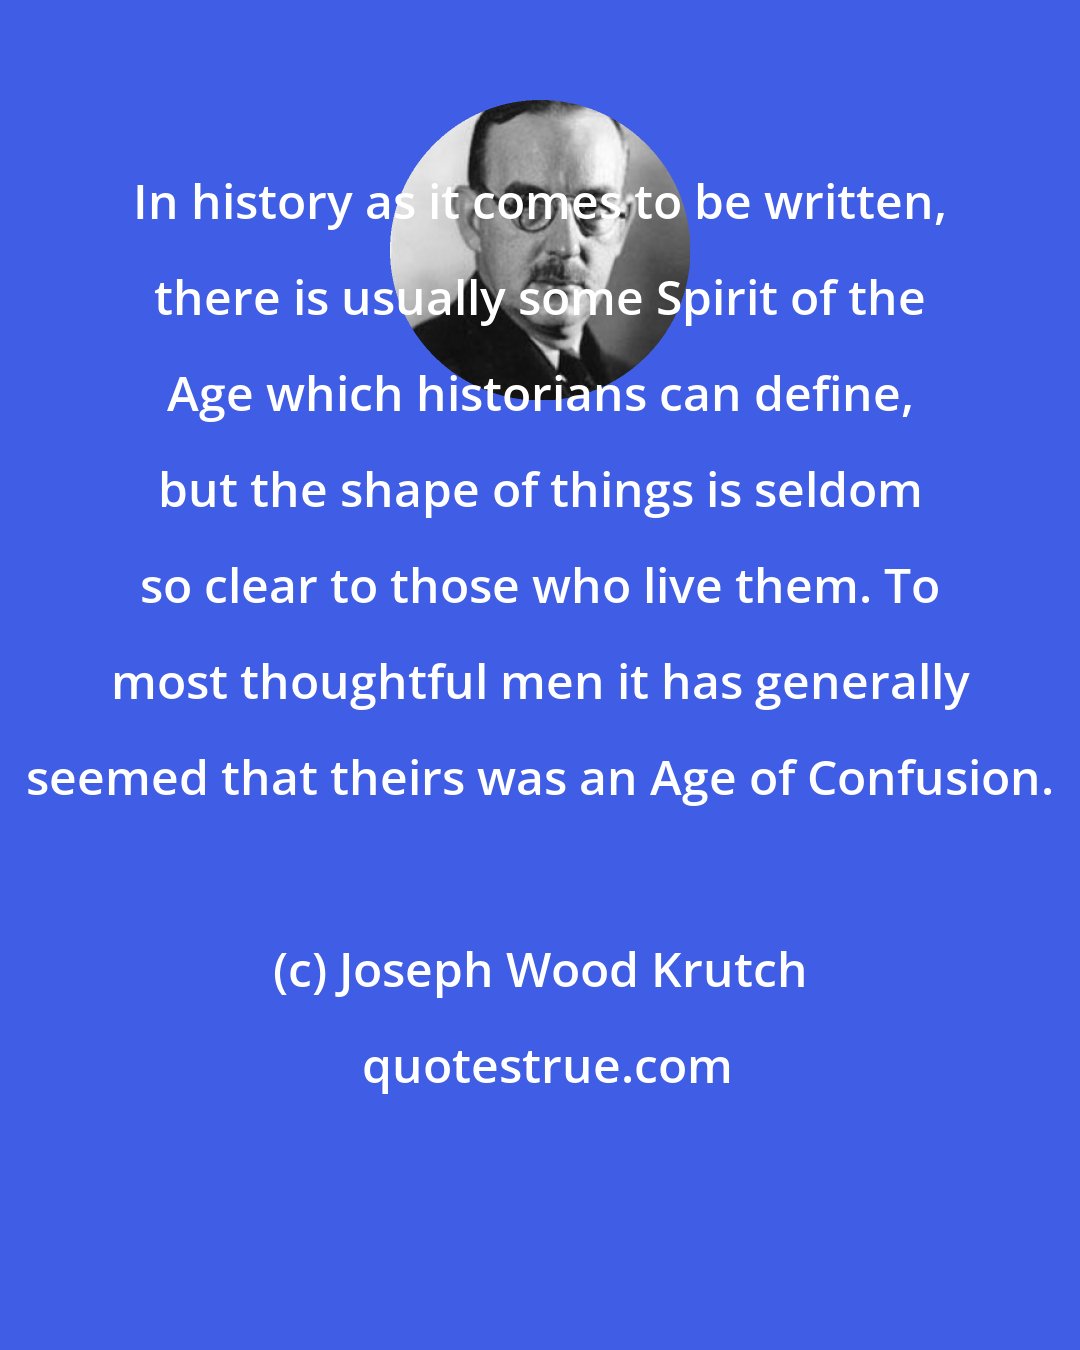 Joseph Wood Krutch: In history as it comes to be written, there is usually some Spirit of the Age which historians can define, but the shape of things is seldom so clear to those who live them. To most thoughtful men it has generally seemed that theirs was an Age of Confusion.